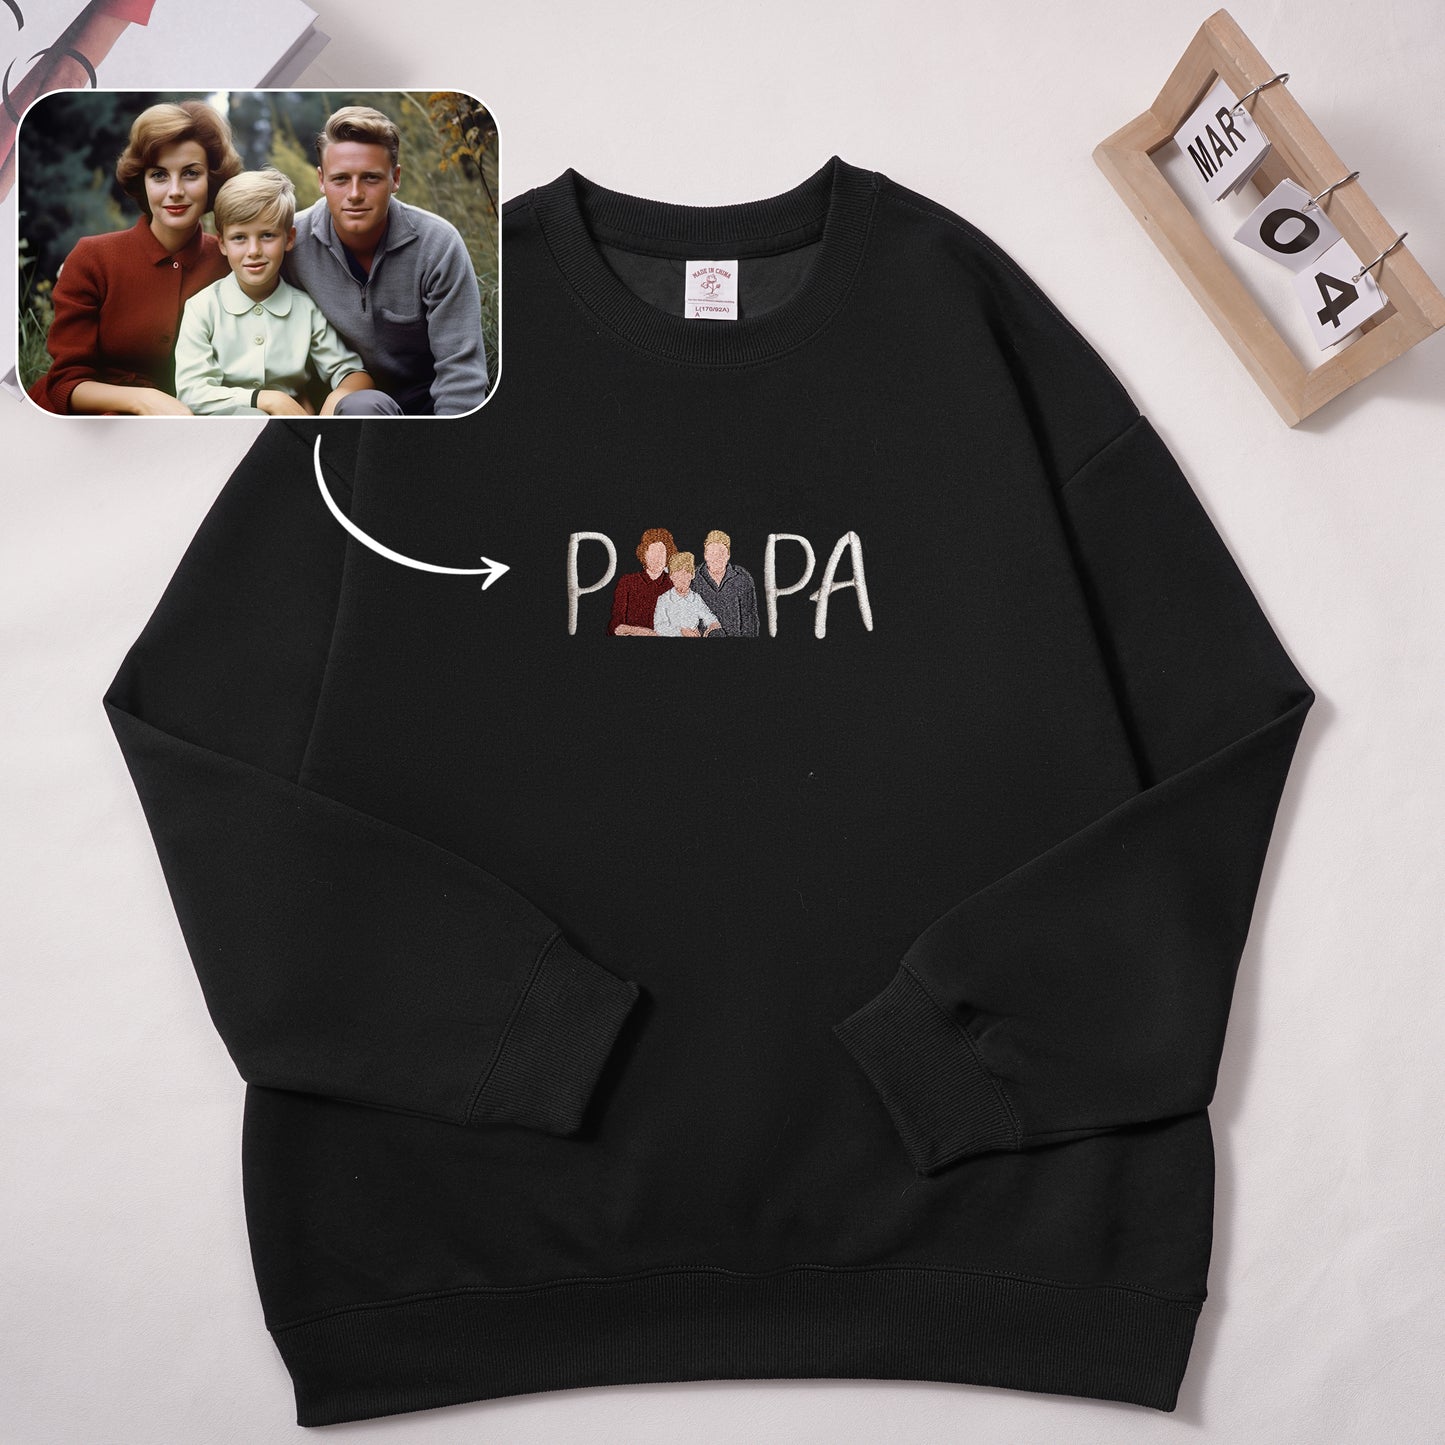 Personalized Dad Photo Embroidered T-Shirt Sweatshirt, Unique Father's Day Gift